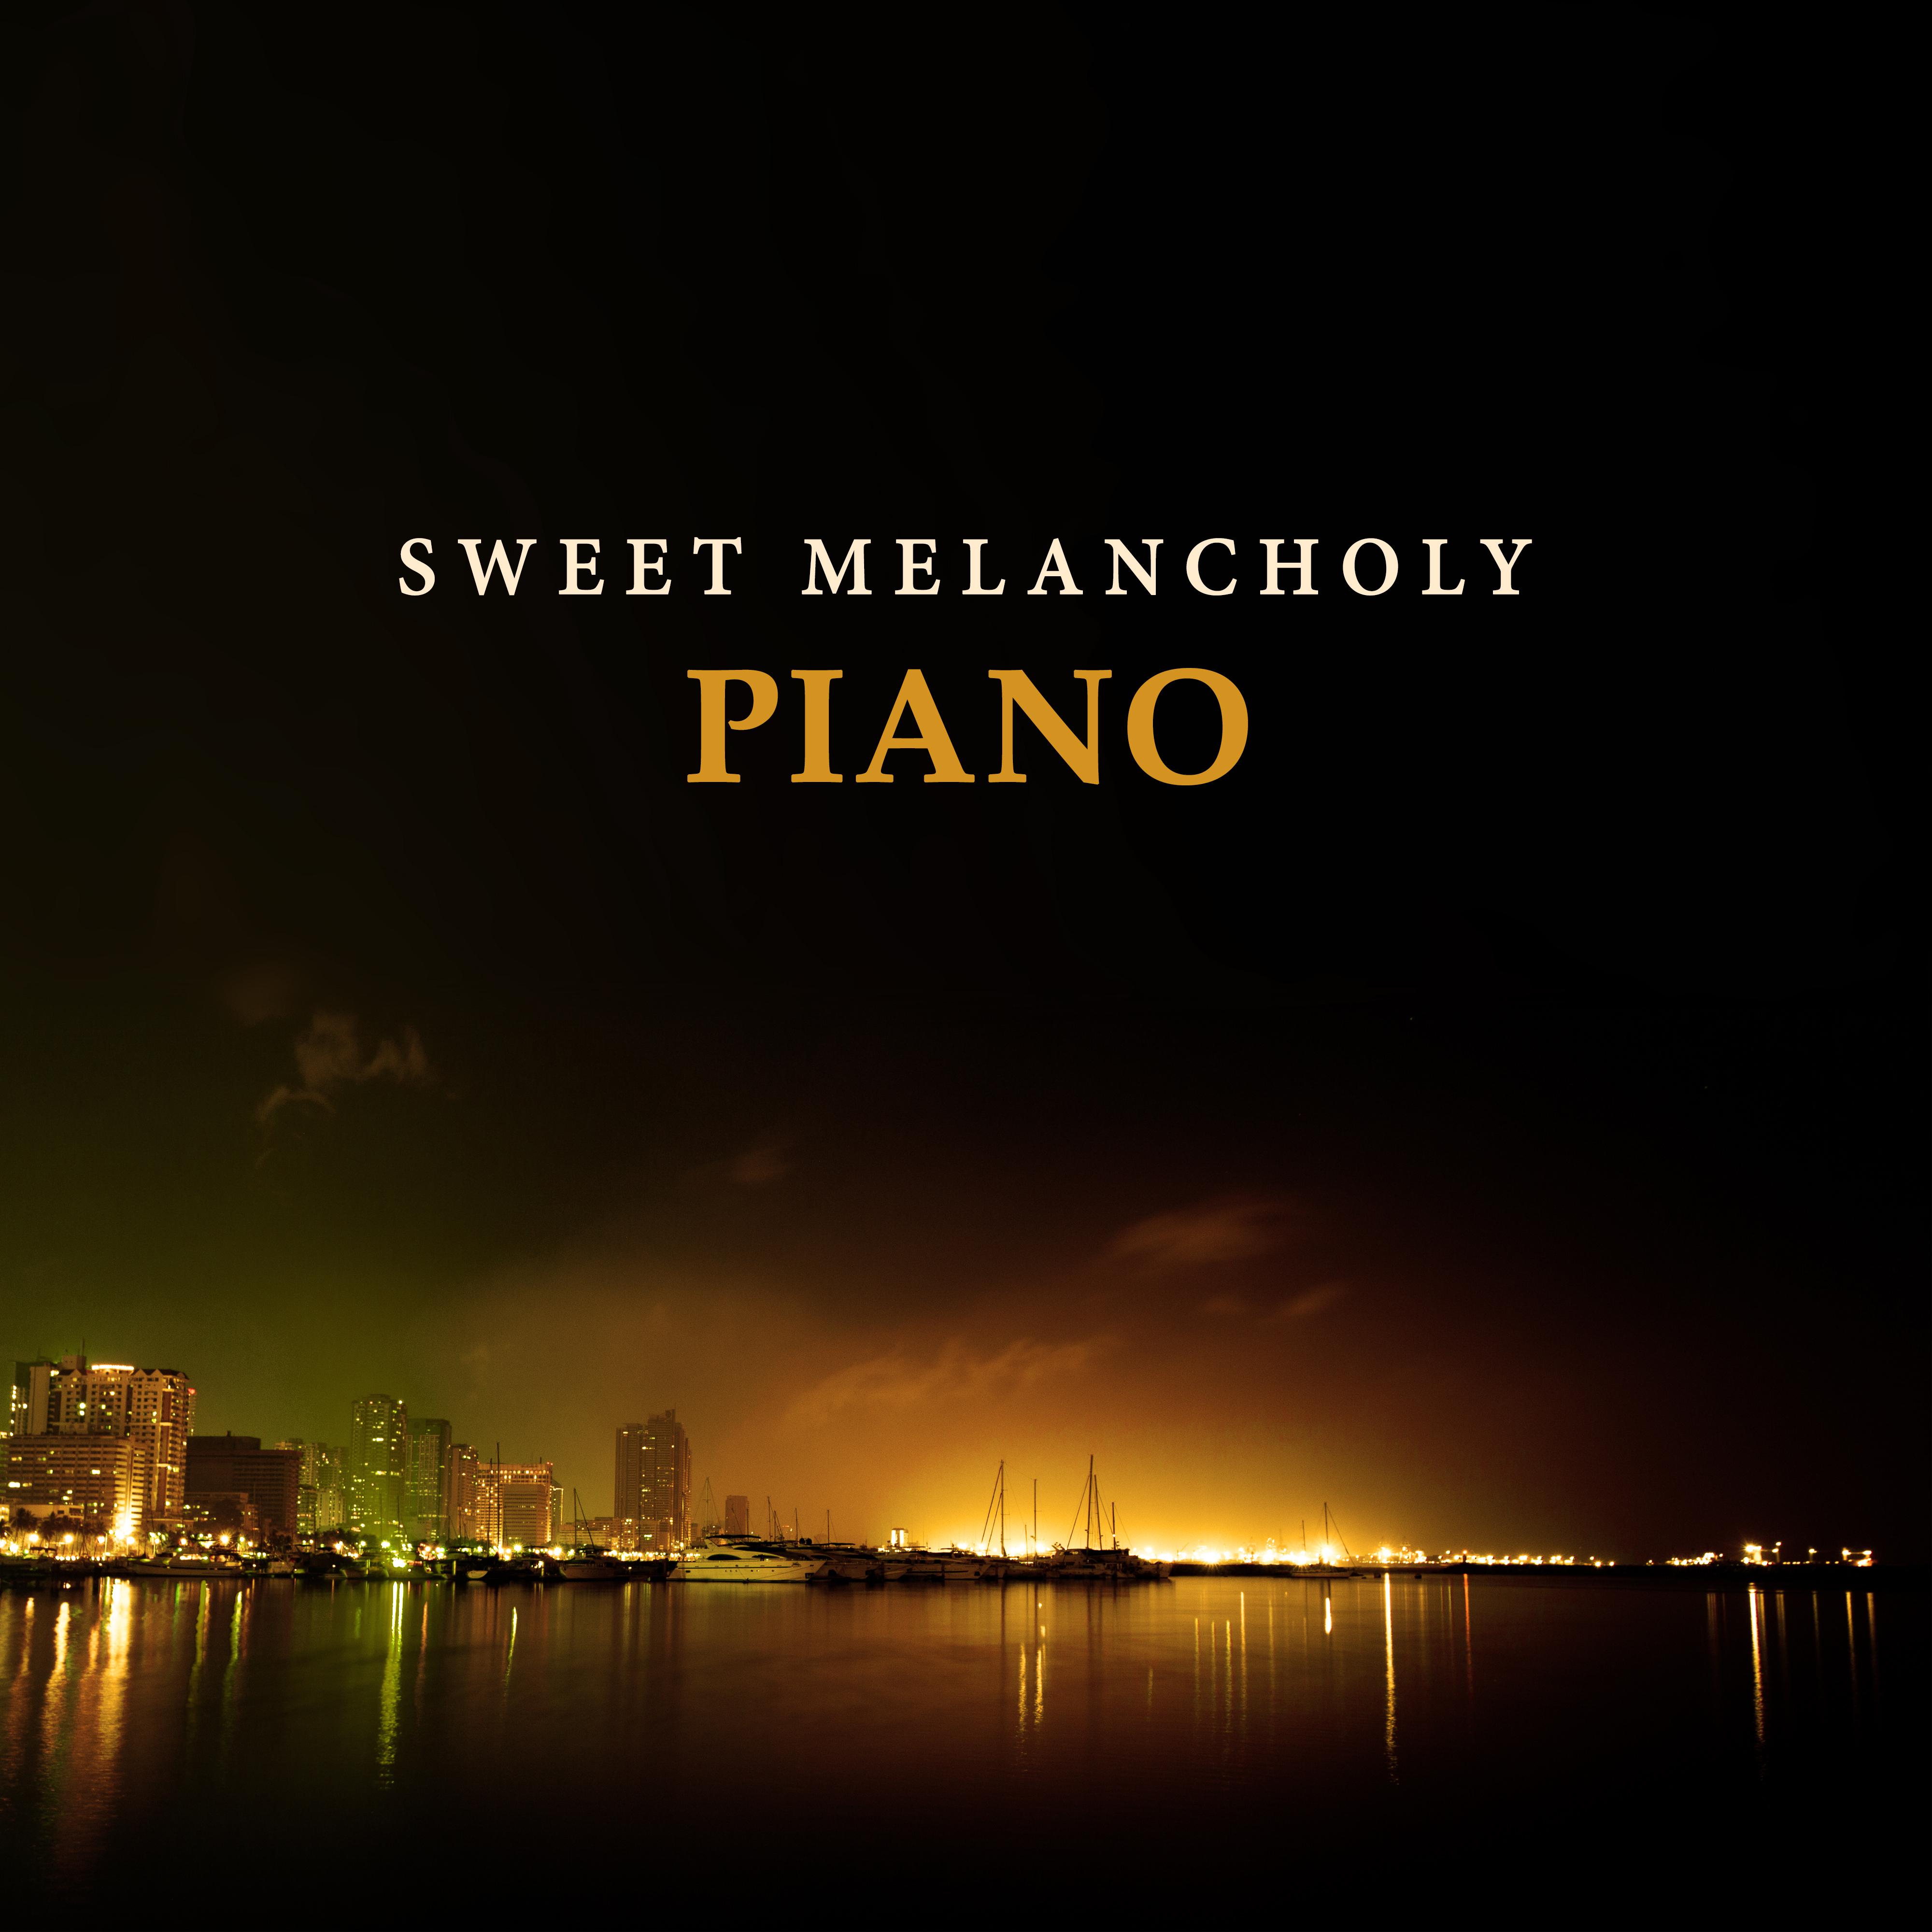 Sweet Melancholy Piano  Sentimental Mood, Smooth Jazz, Ambient, Instrumental Piano Music